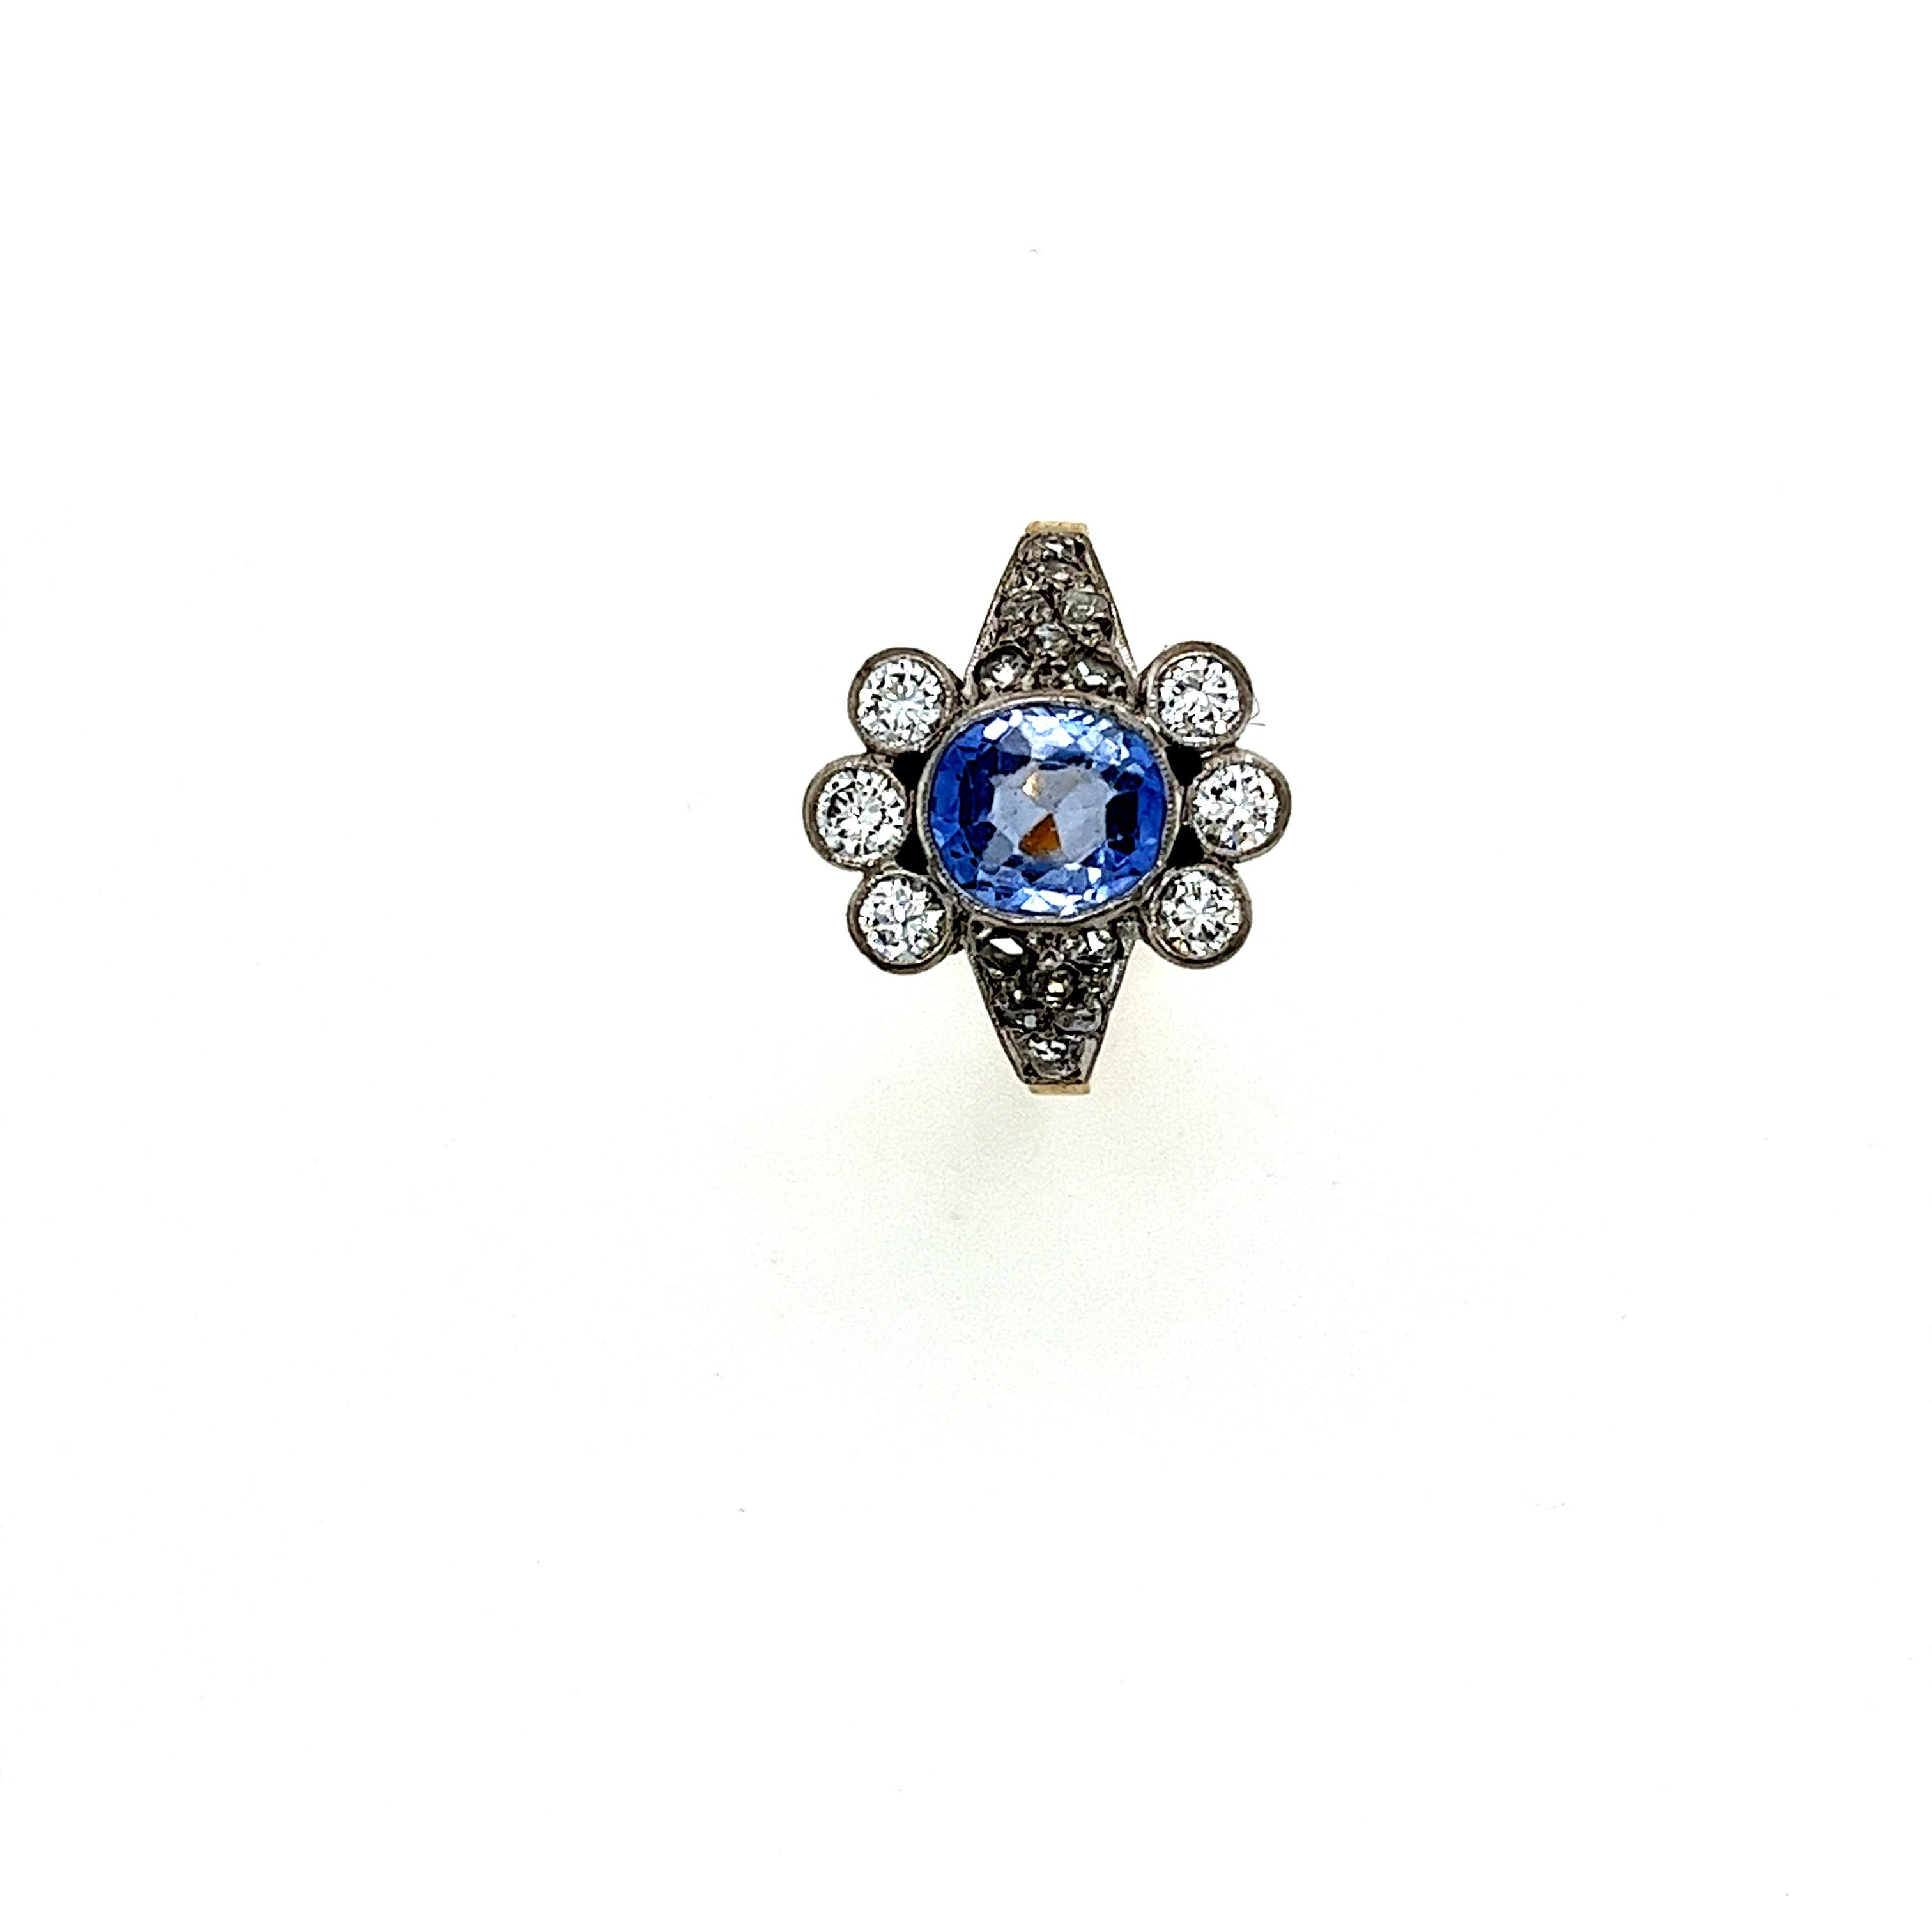 Brilliant Cut Bespoke Sapphire And Diamond Cluster Ring 2.42ct